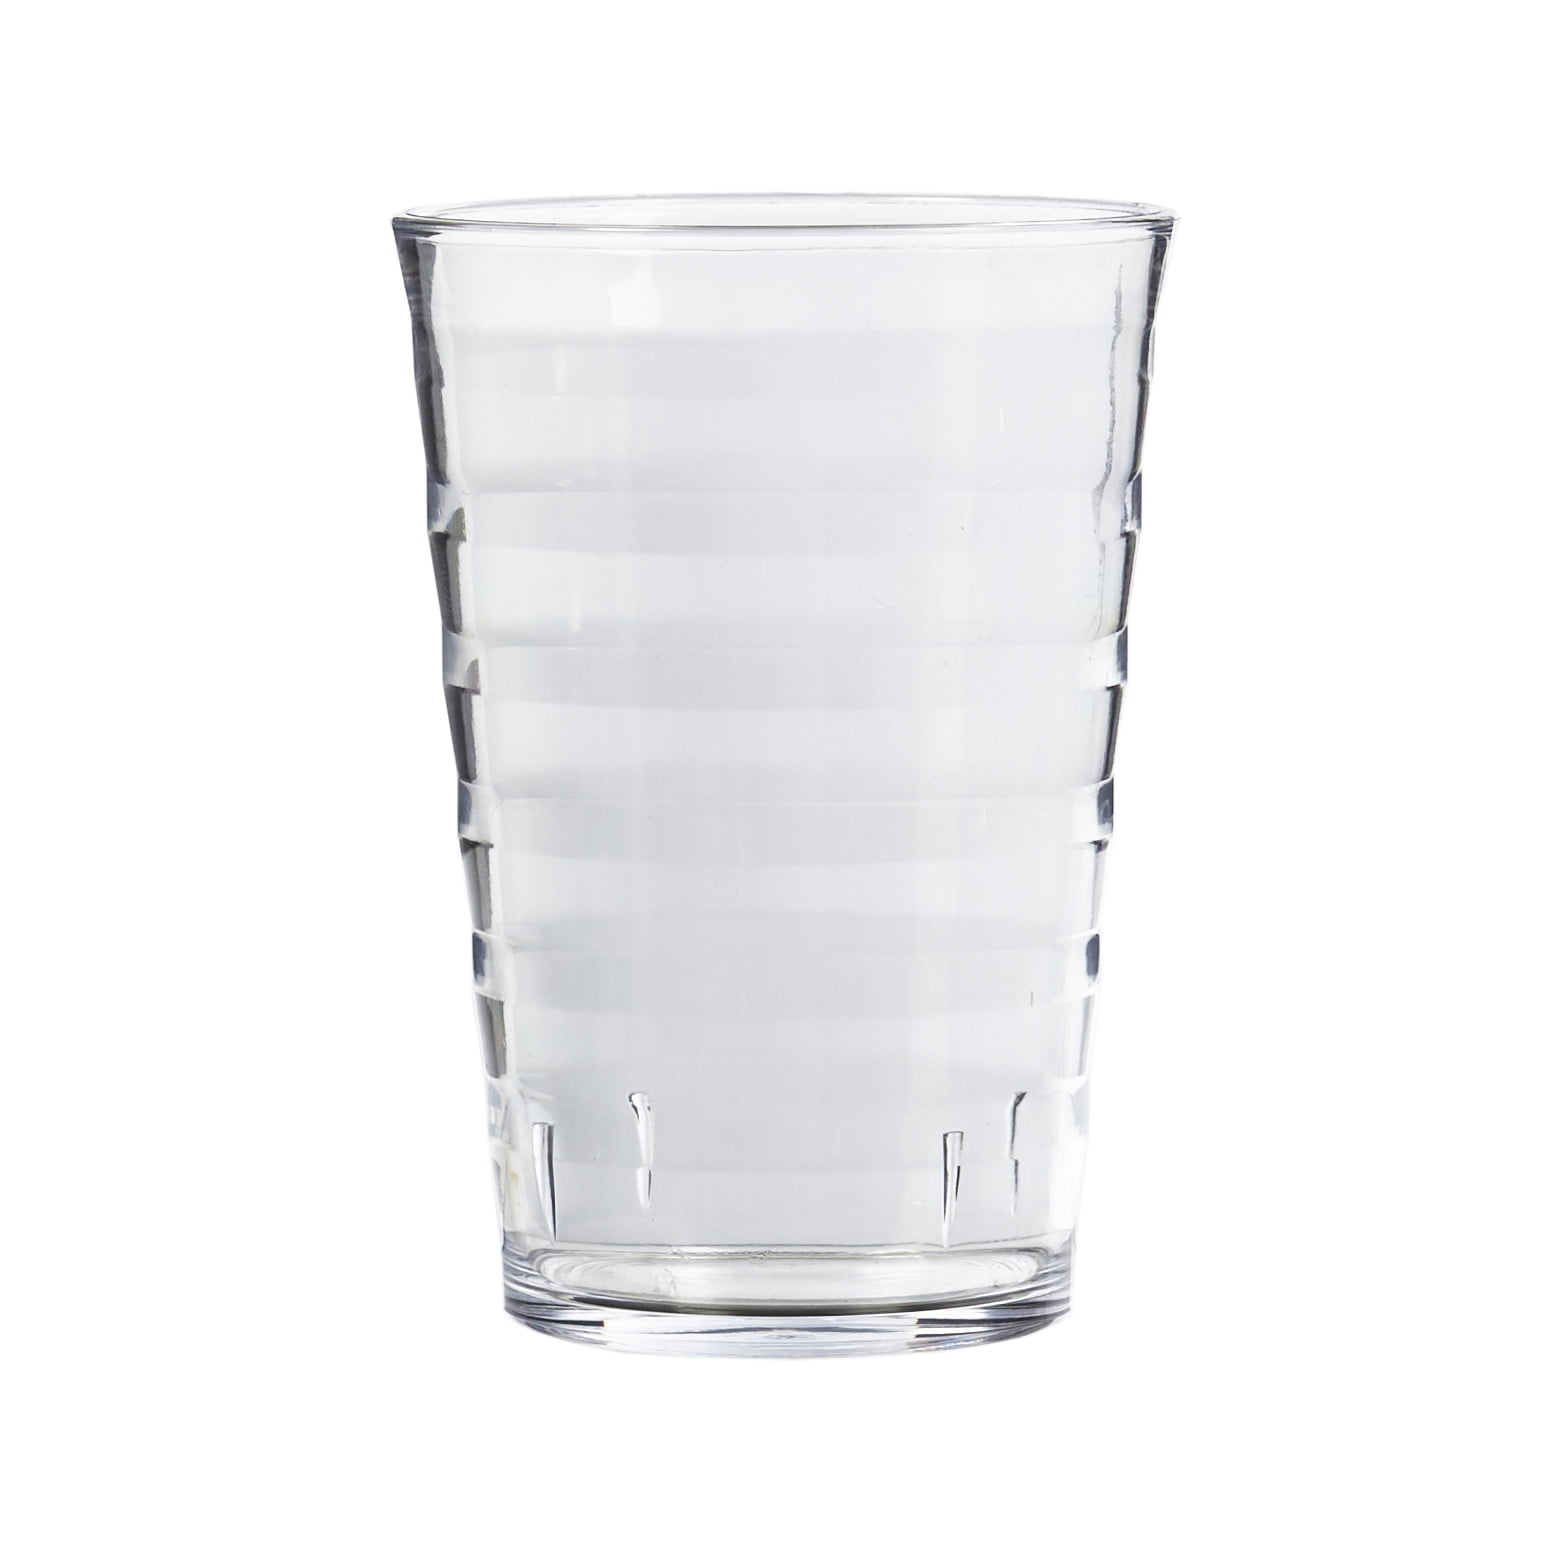 Drinking Glasses with Bamboo Lids and Straw-15.89/18.59oz Glass